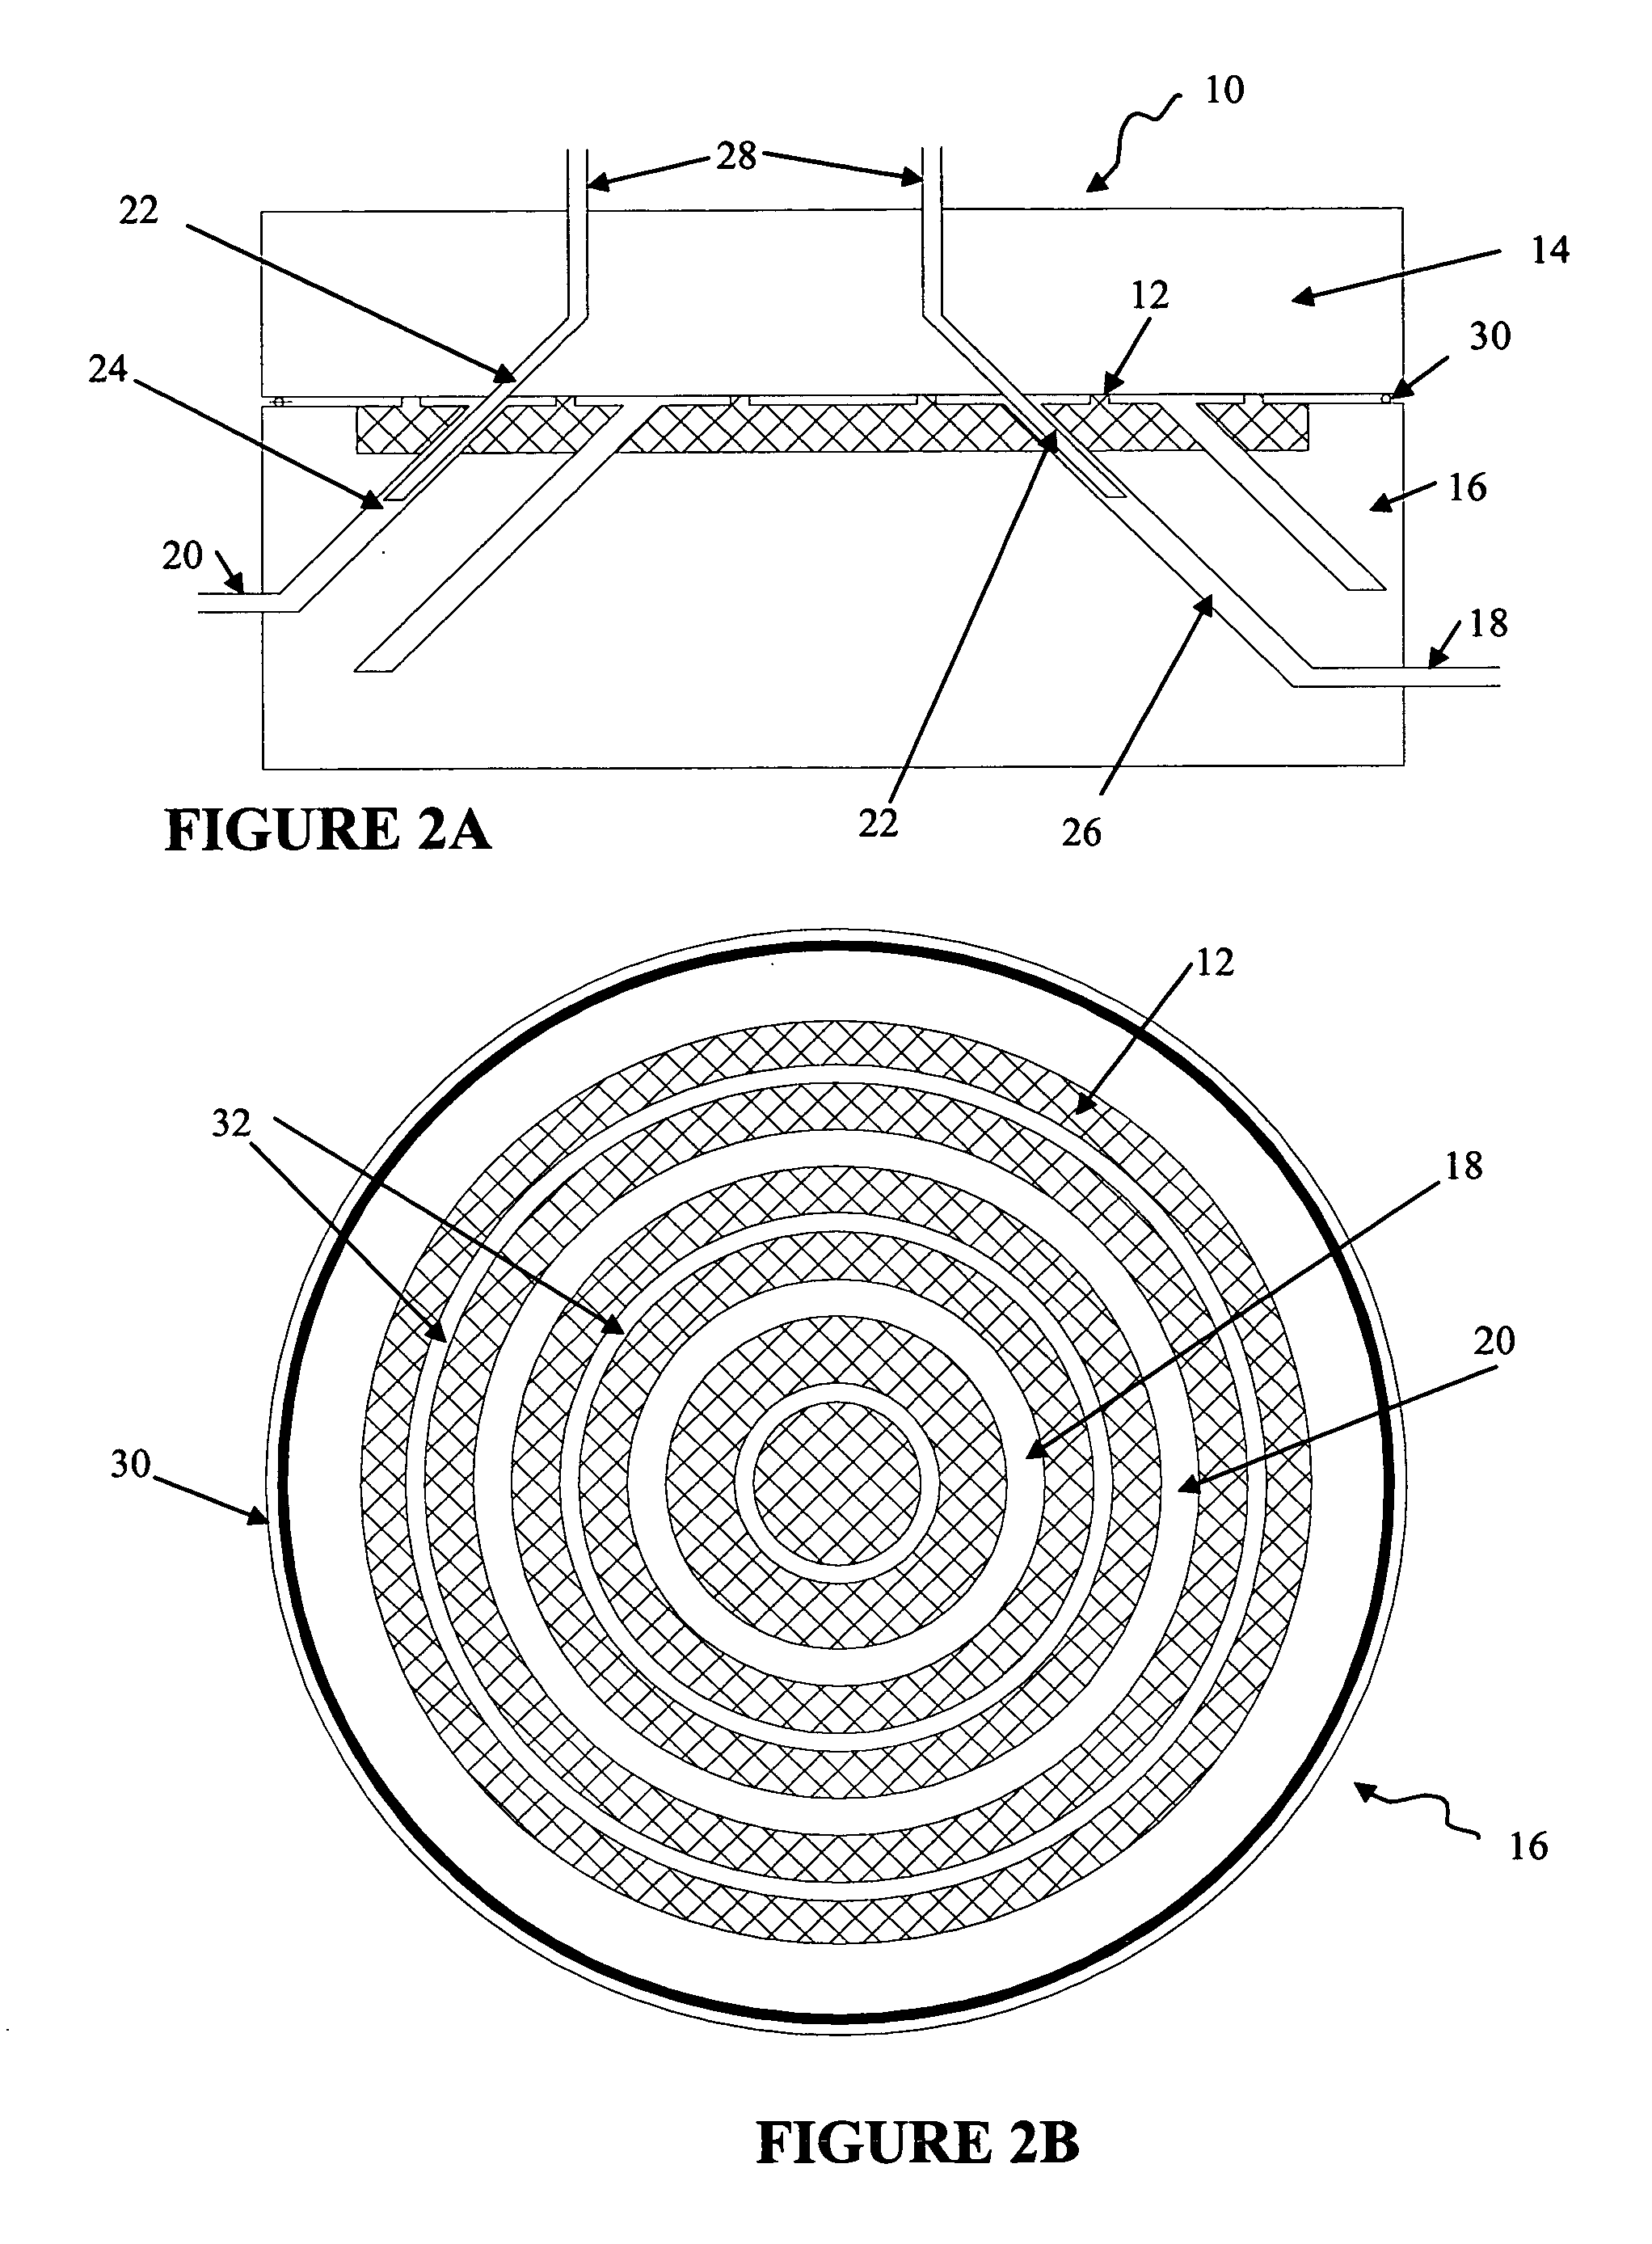 Centrifuge permeameter for unsaturated soils system